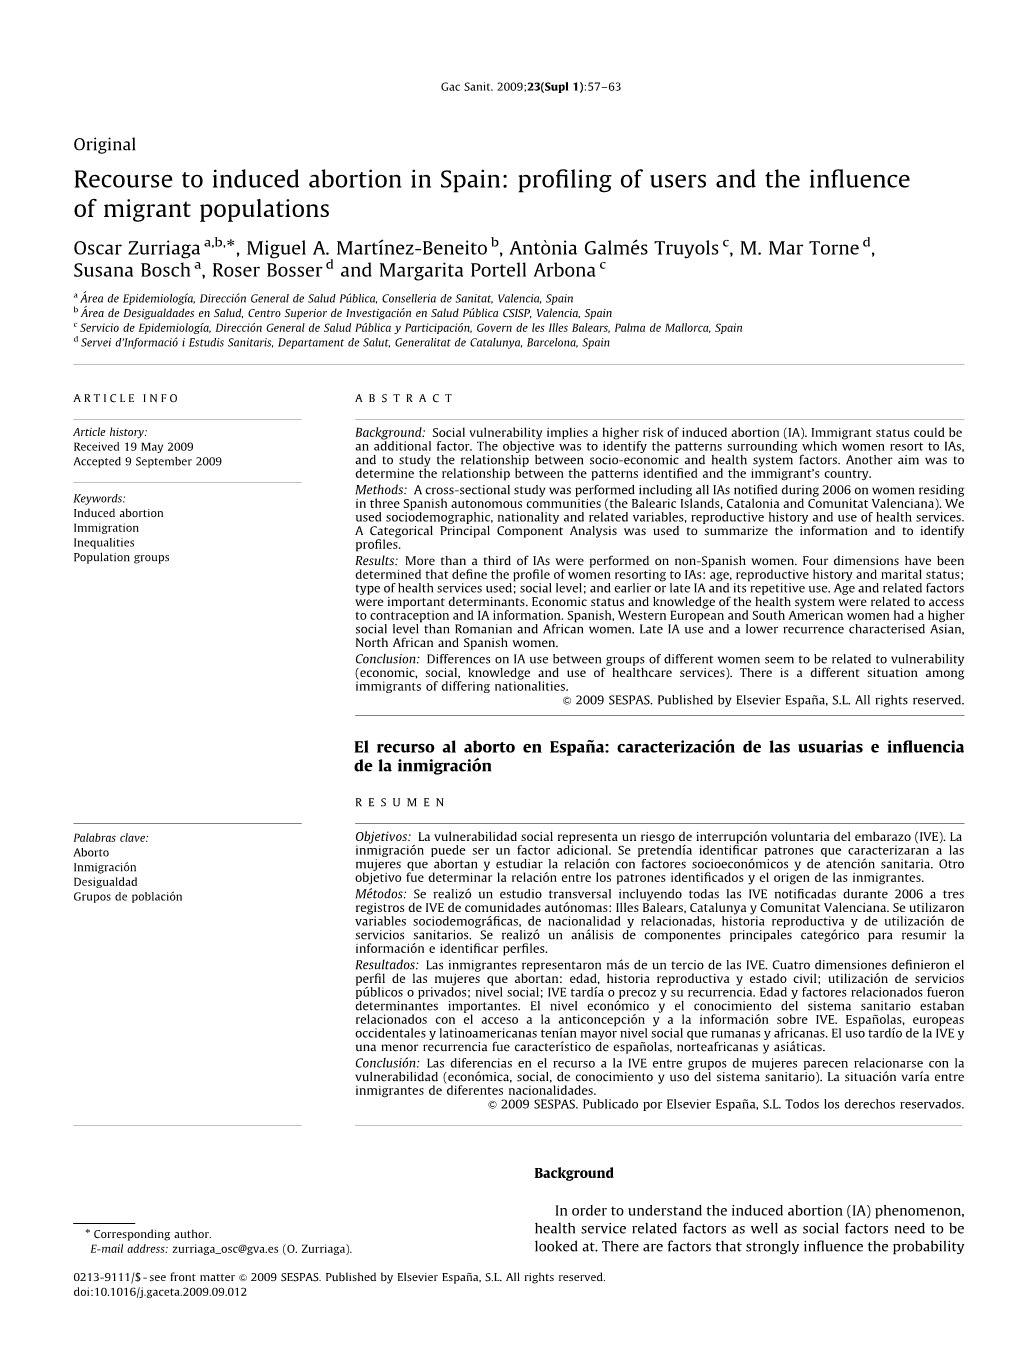 Recourse to Induced Abortion in Spain: Proﬁling of Users and the Inﬂuence of Migrant Populations